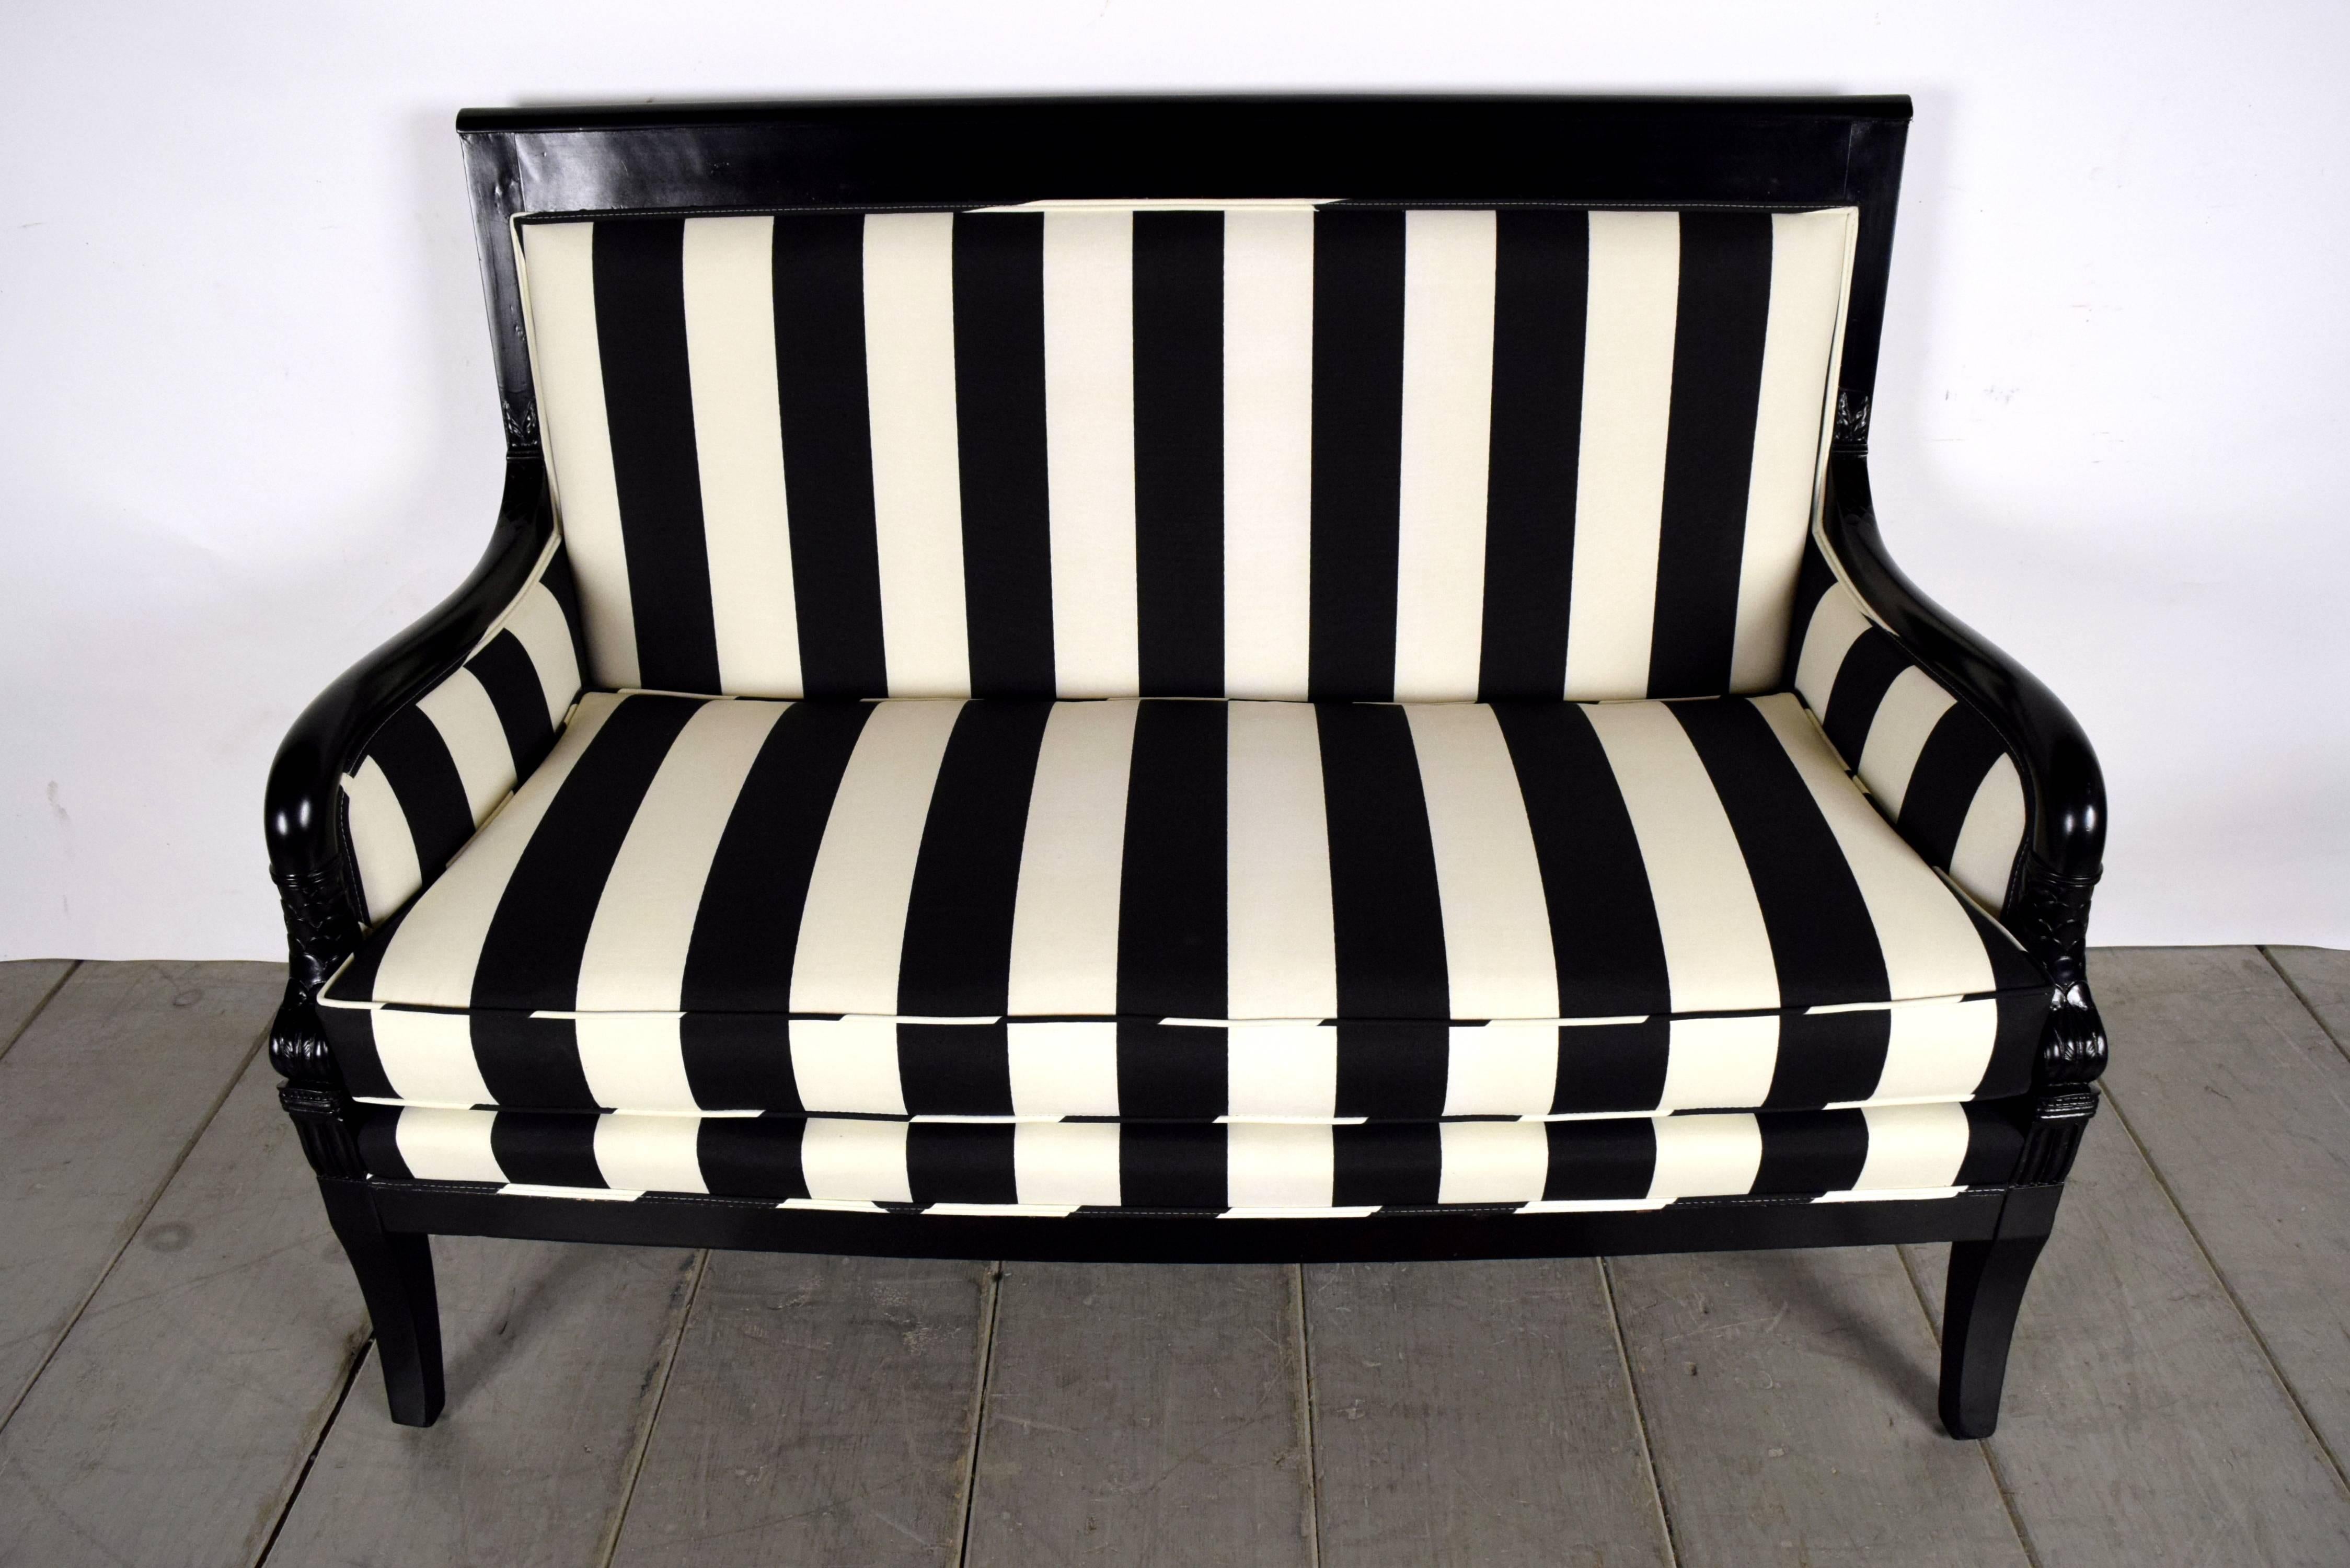 This elegant 1900's Empire-style settee or sofa features a solid wood frame that has been refinished in a rich black lacquered color. On each arm there is a carved depiction of  sea fish and rosettes above the front legs. The seat cushion has been